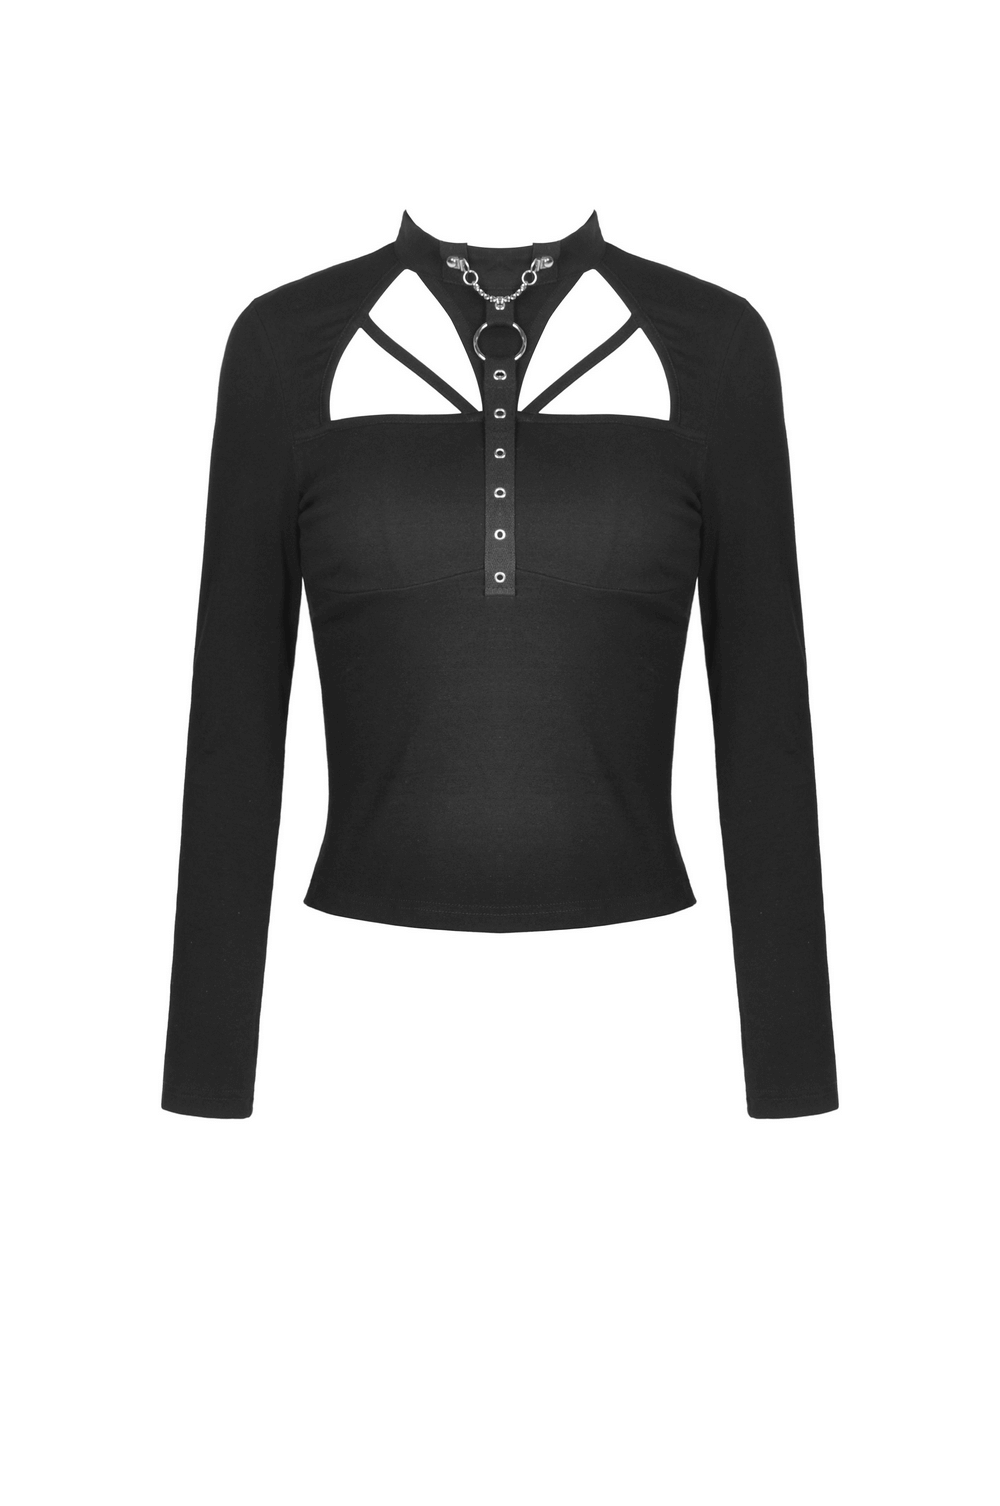 Stylish Black Lace-Up Top with Cut-Out Detailing